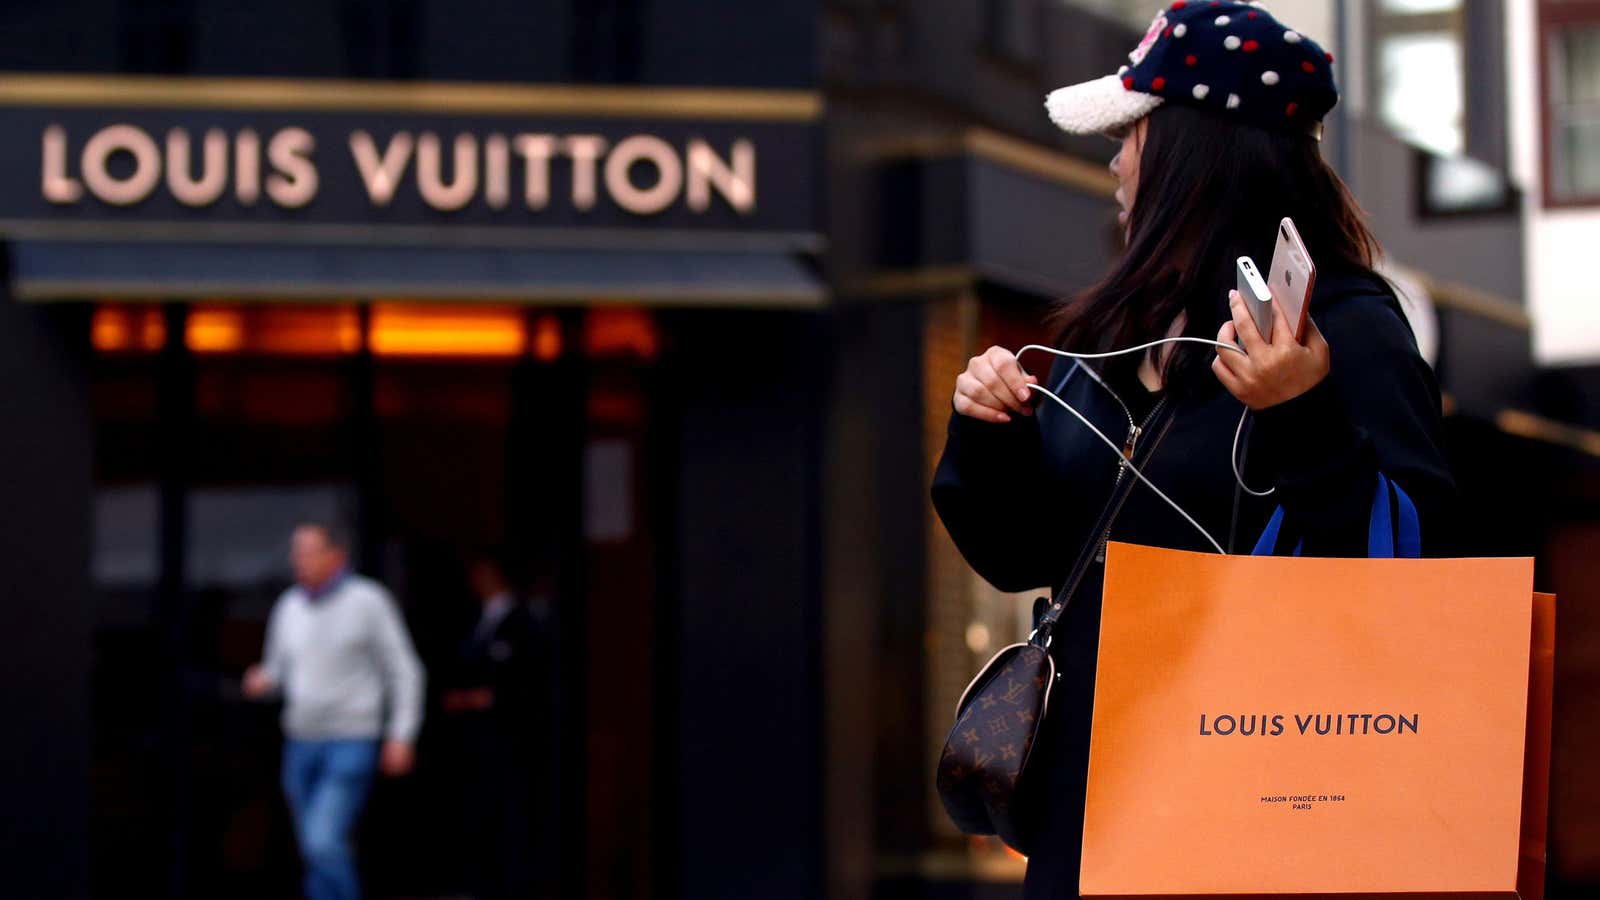 Louis Vuitton And Other Designer Brands Sale!